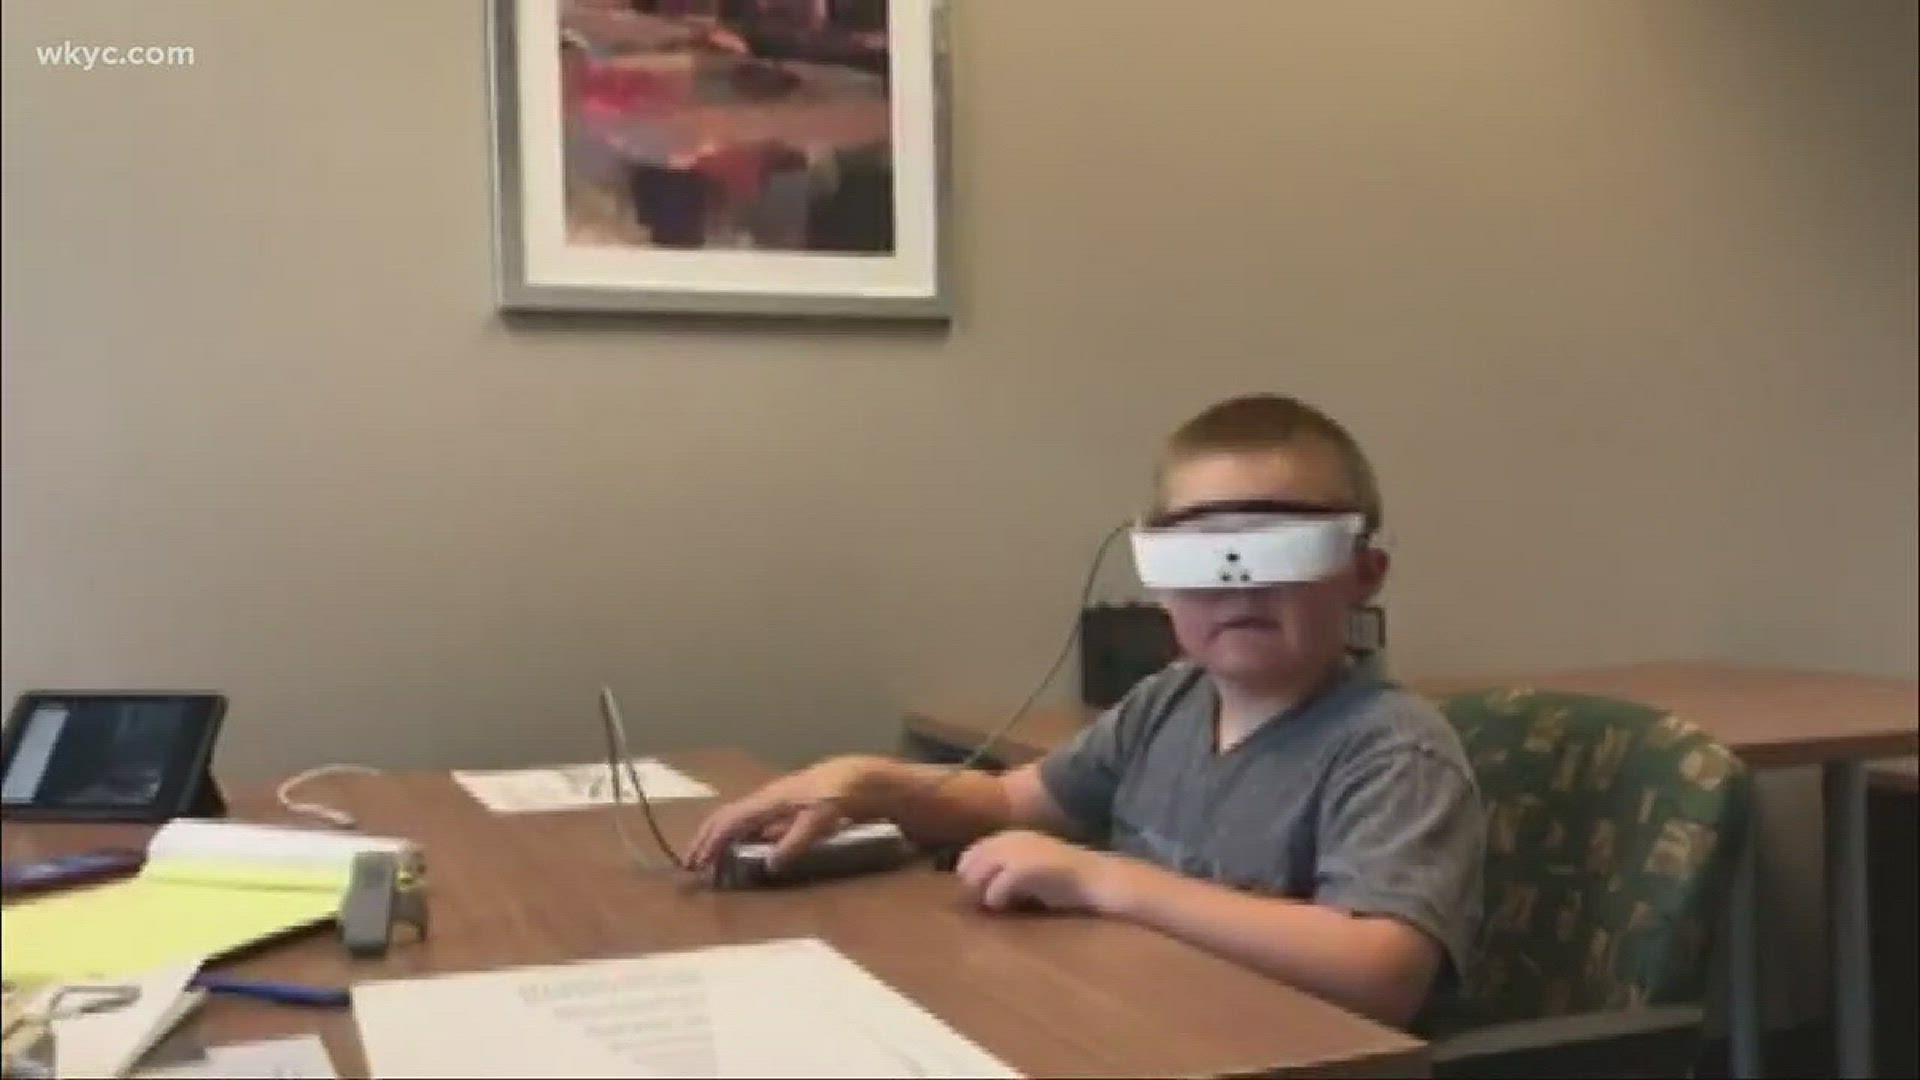 Local boy born legally blind can now see thanks to technology